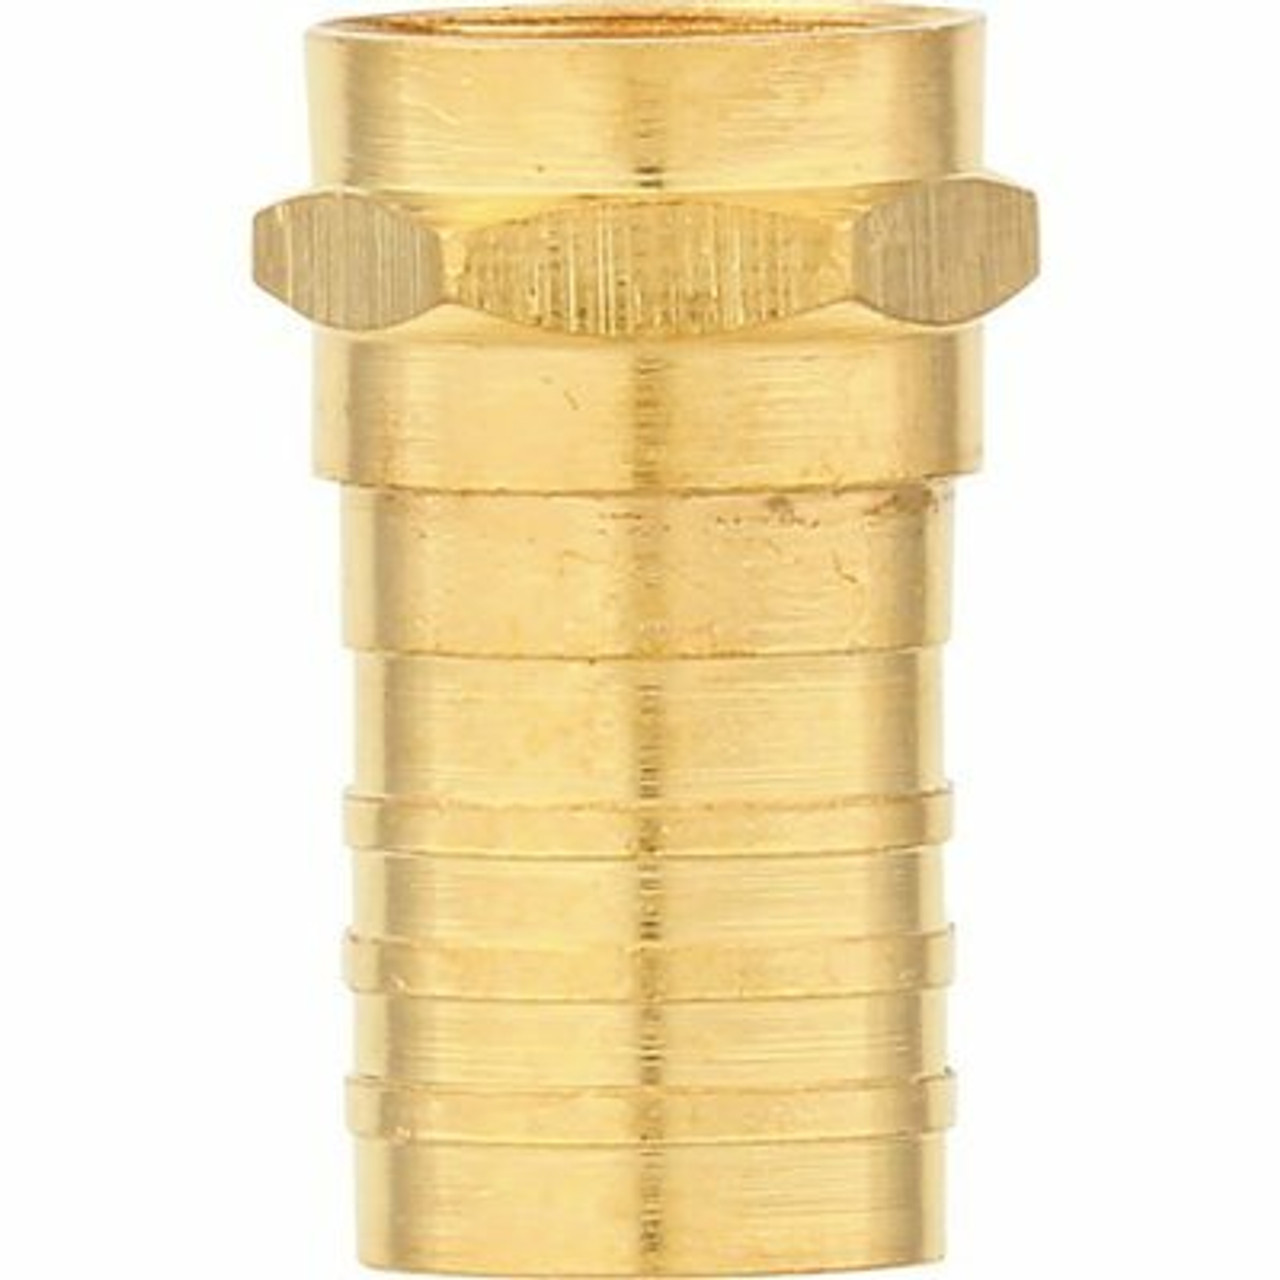 Zenith Crimpon F Connectors In Gold, (10-Pack)